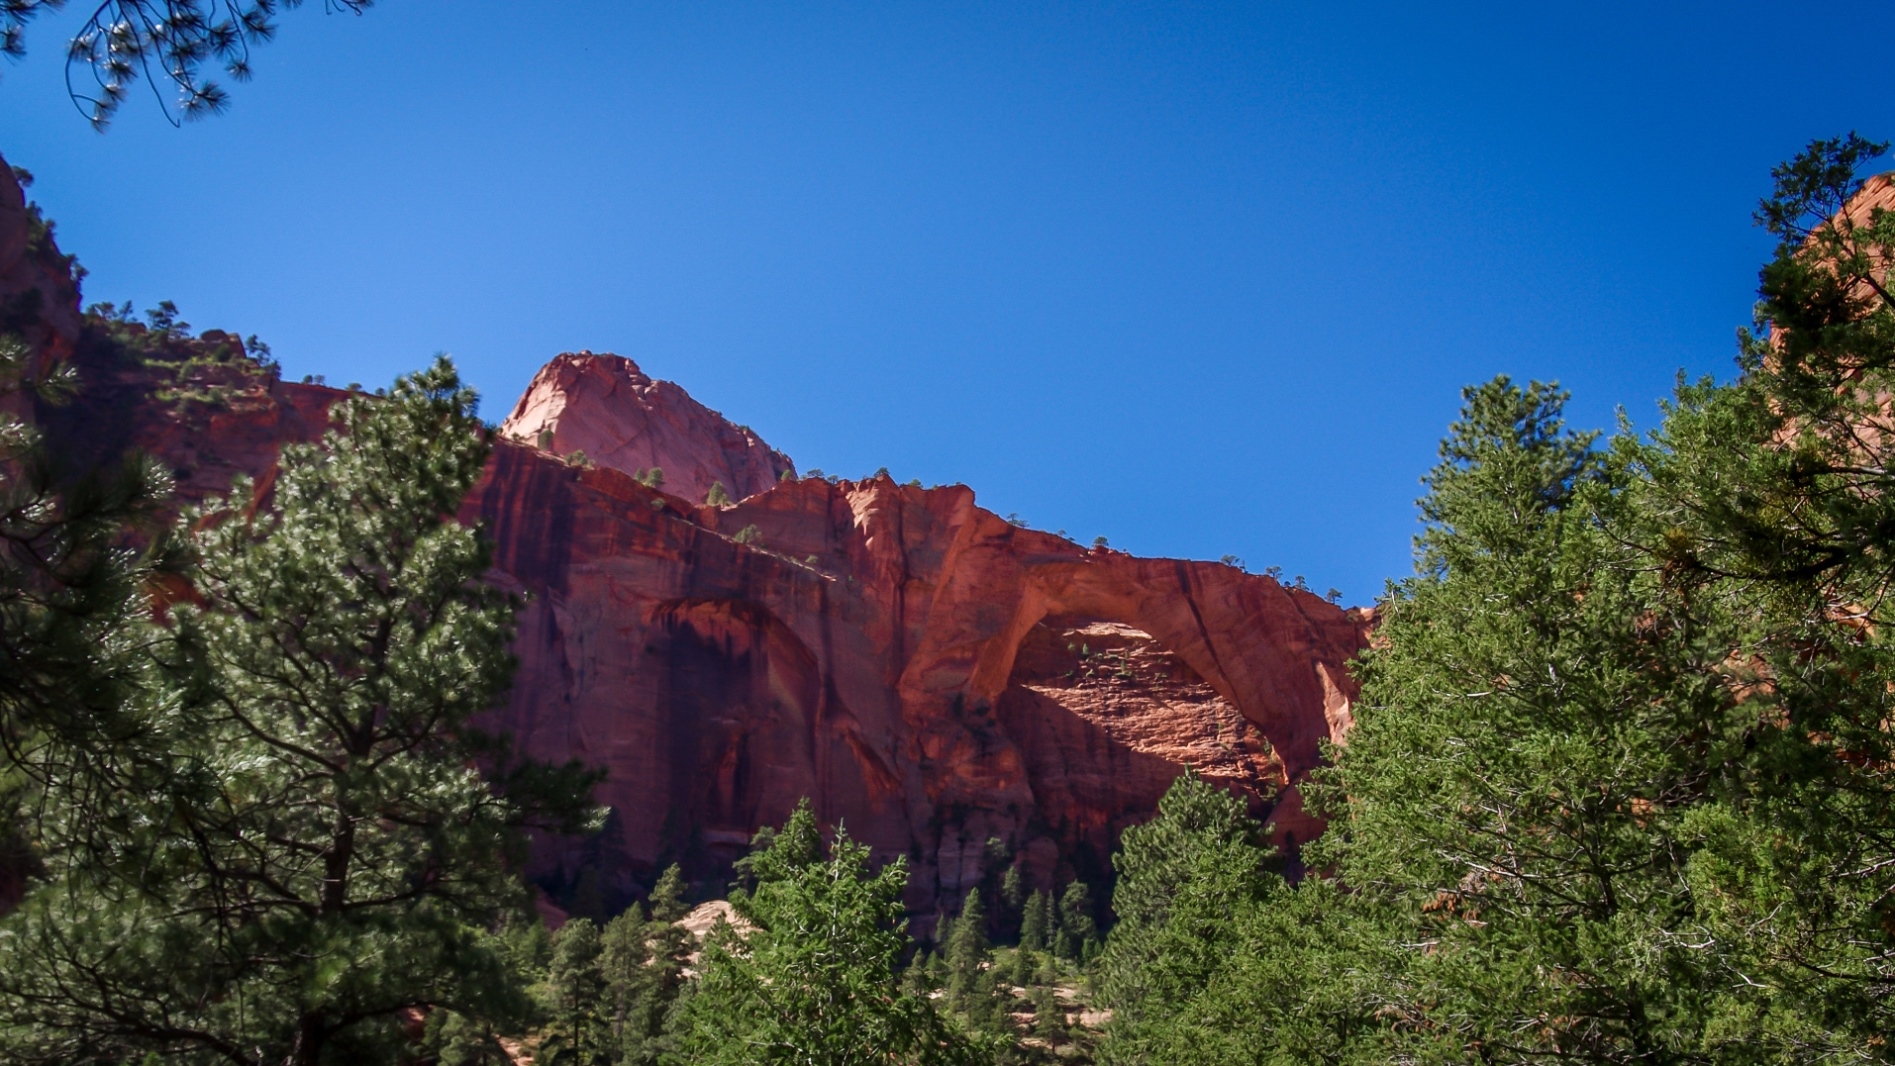 Distant Kolob Arch In Kolob Canyon Section Of Zion National Park, UT